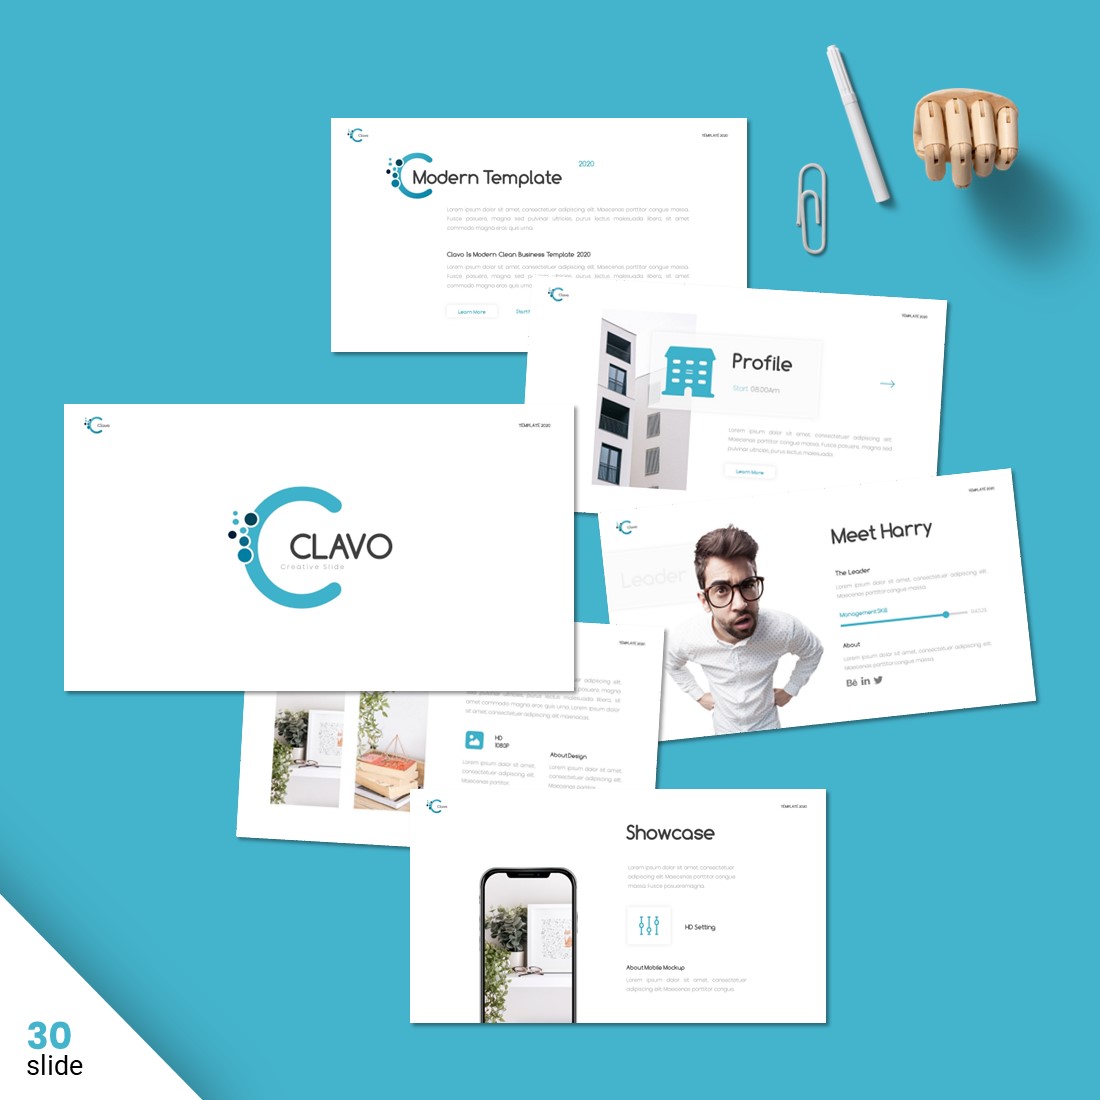 Clavo Minimalist Powerpoint Presentation Template cover image.